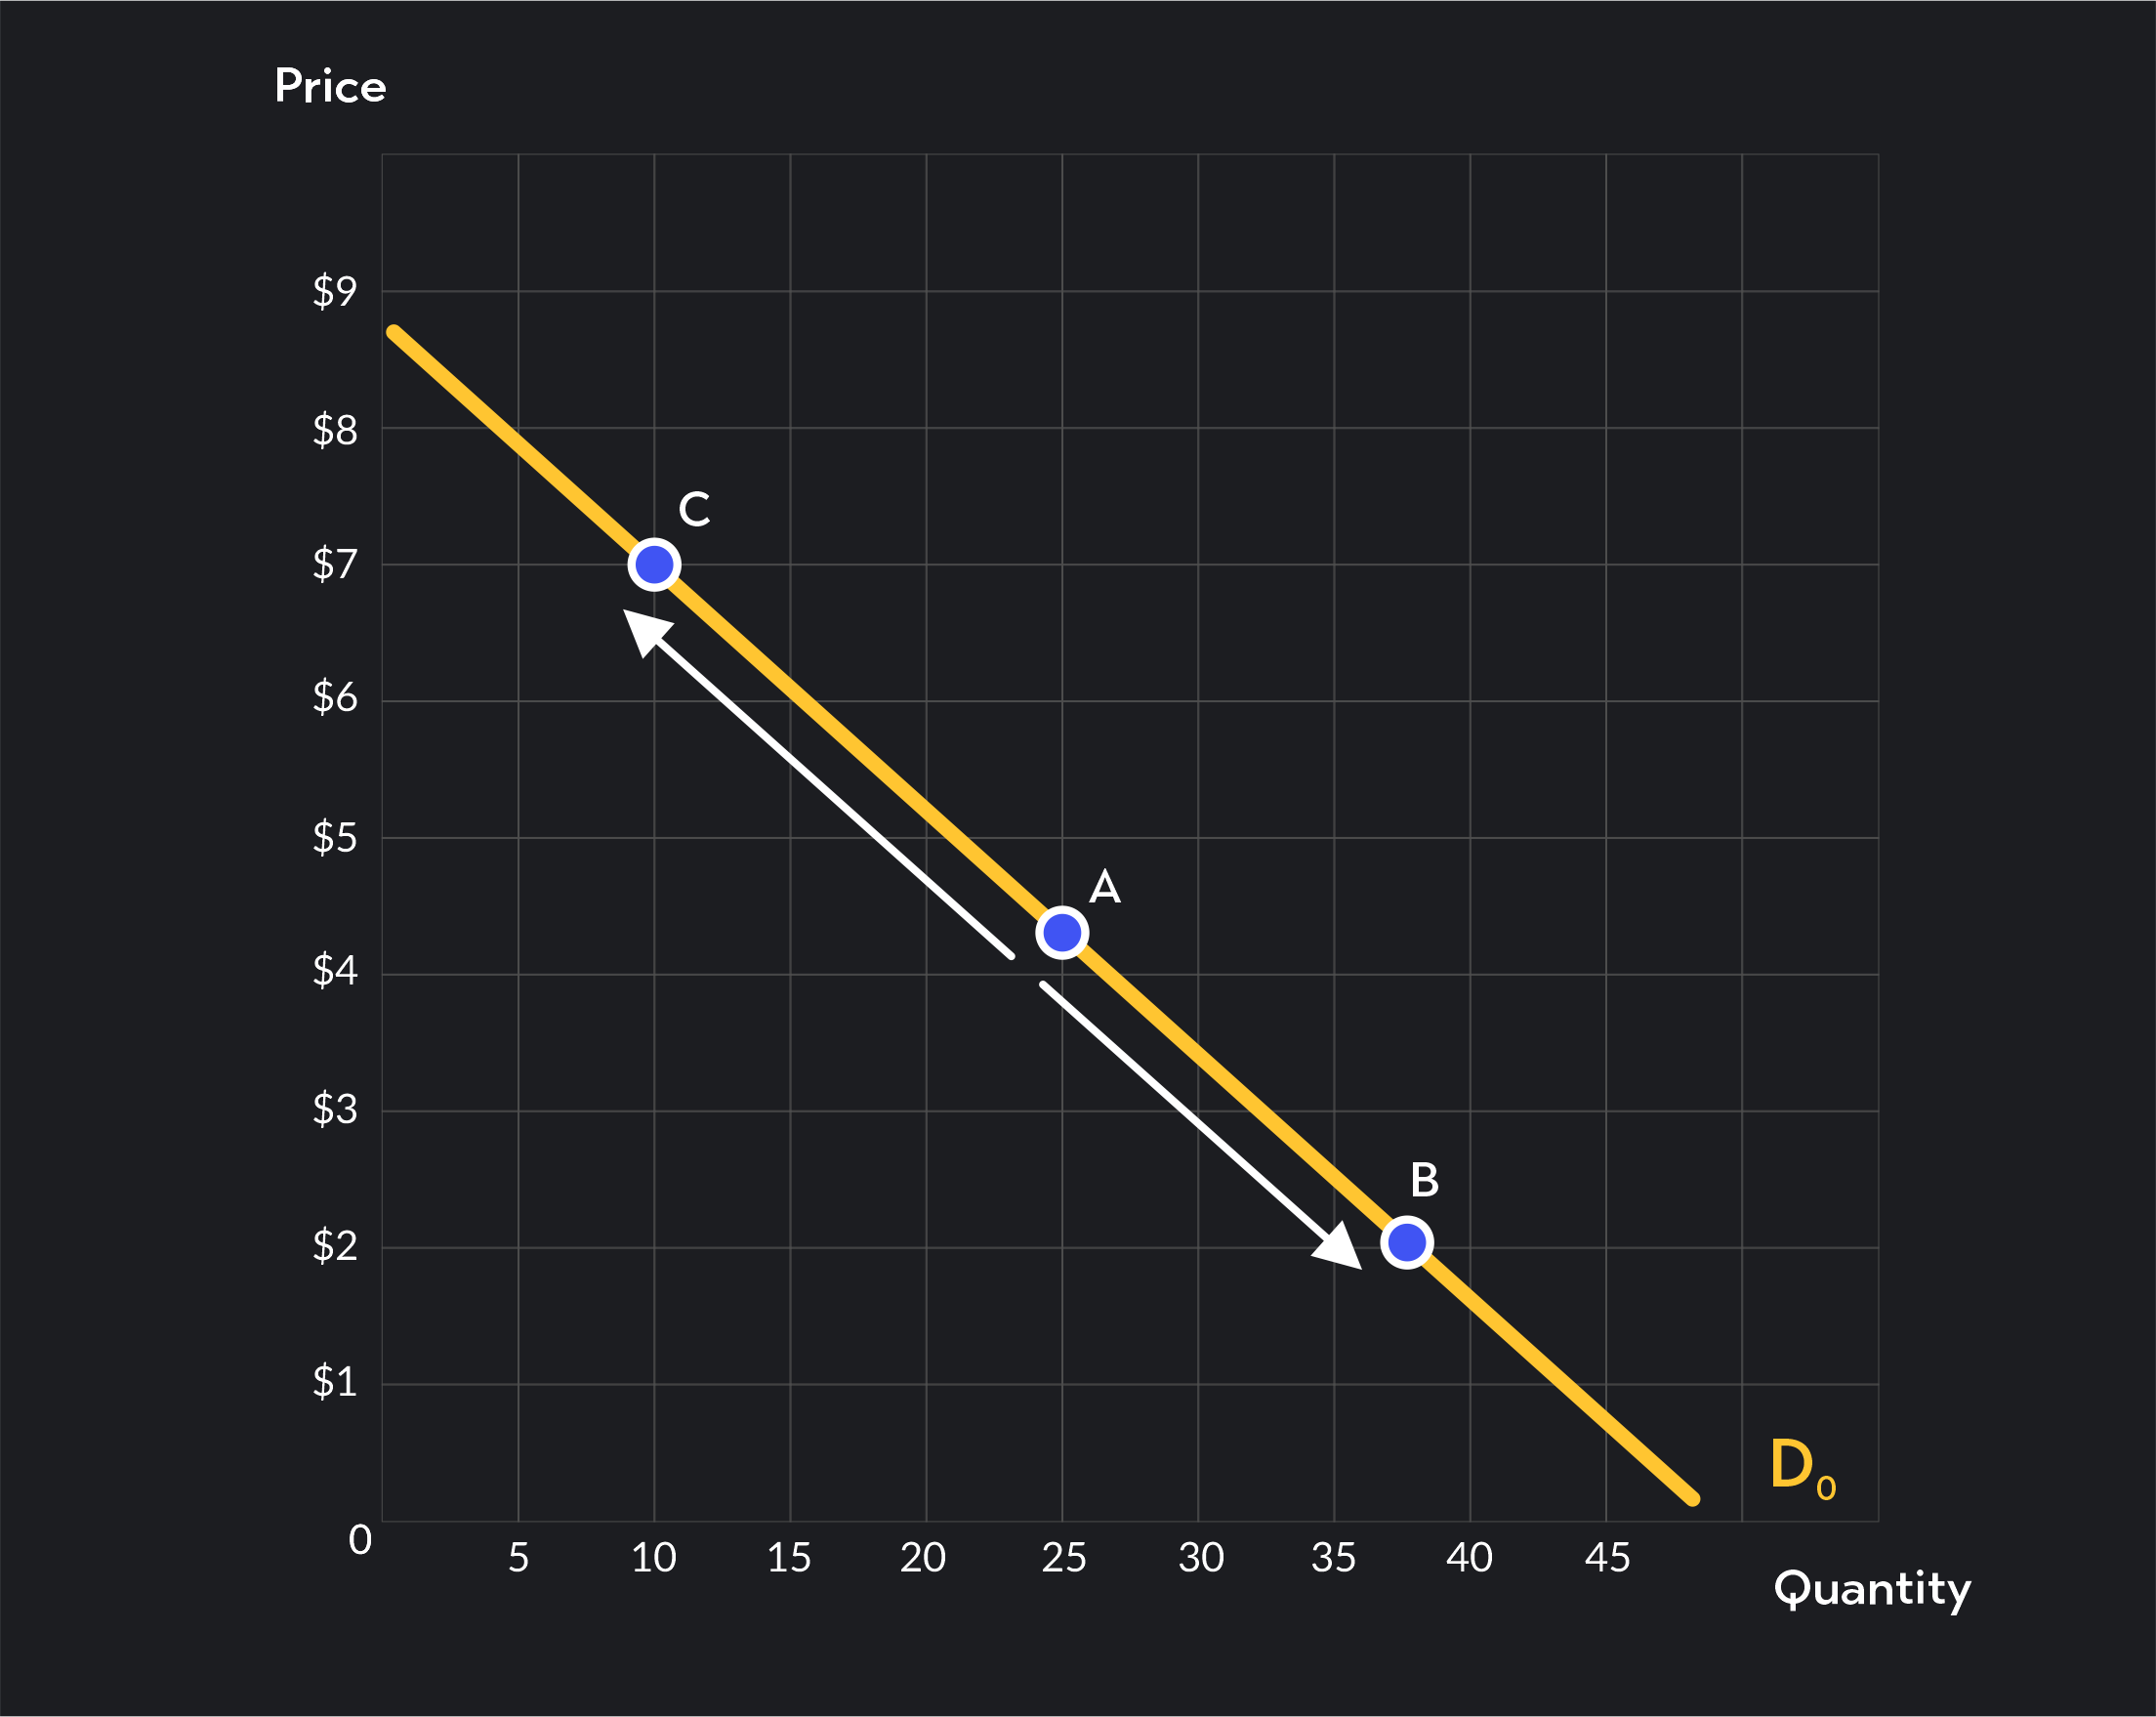 A downward movement of demand curve from Point A to Point C. And graph shows an upward movement along the demand curve as price increases. 